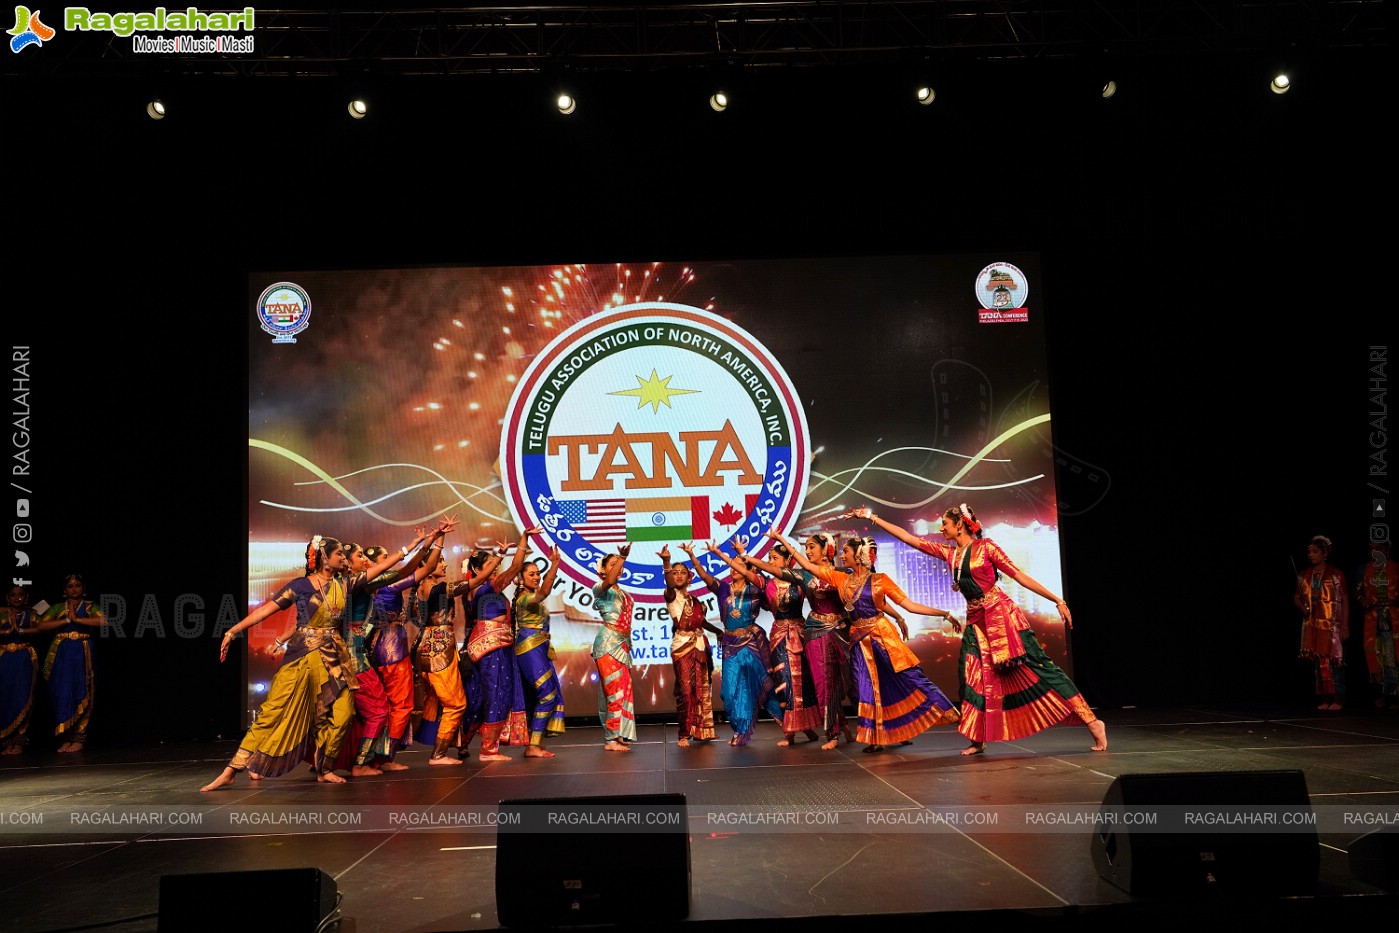 23rd TANA Conference  Day 1 Stage Performances, Philadelphia